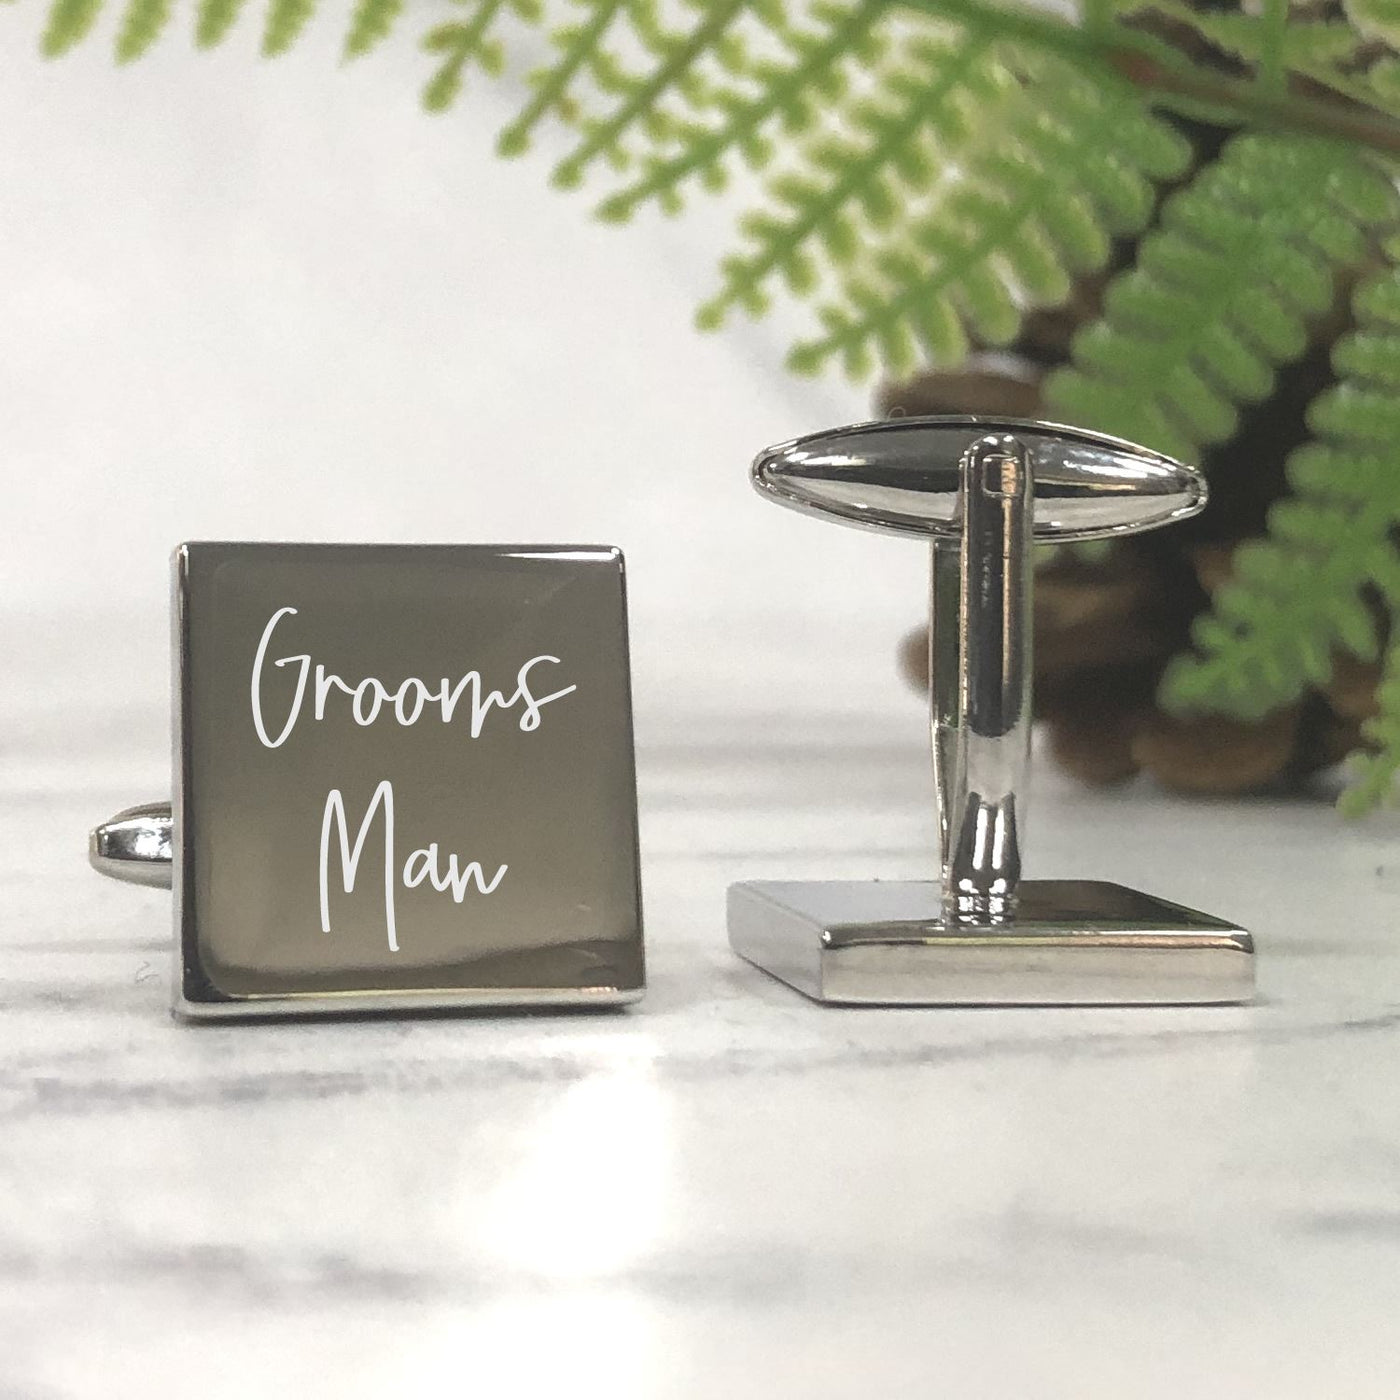 Engraved Wedding Day Square Cufflinks - Grooms Man